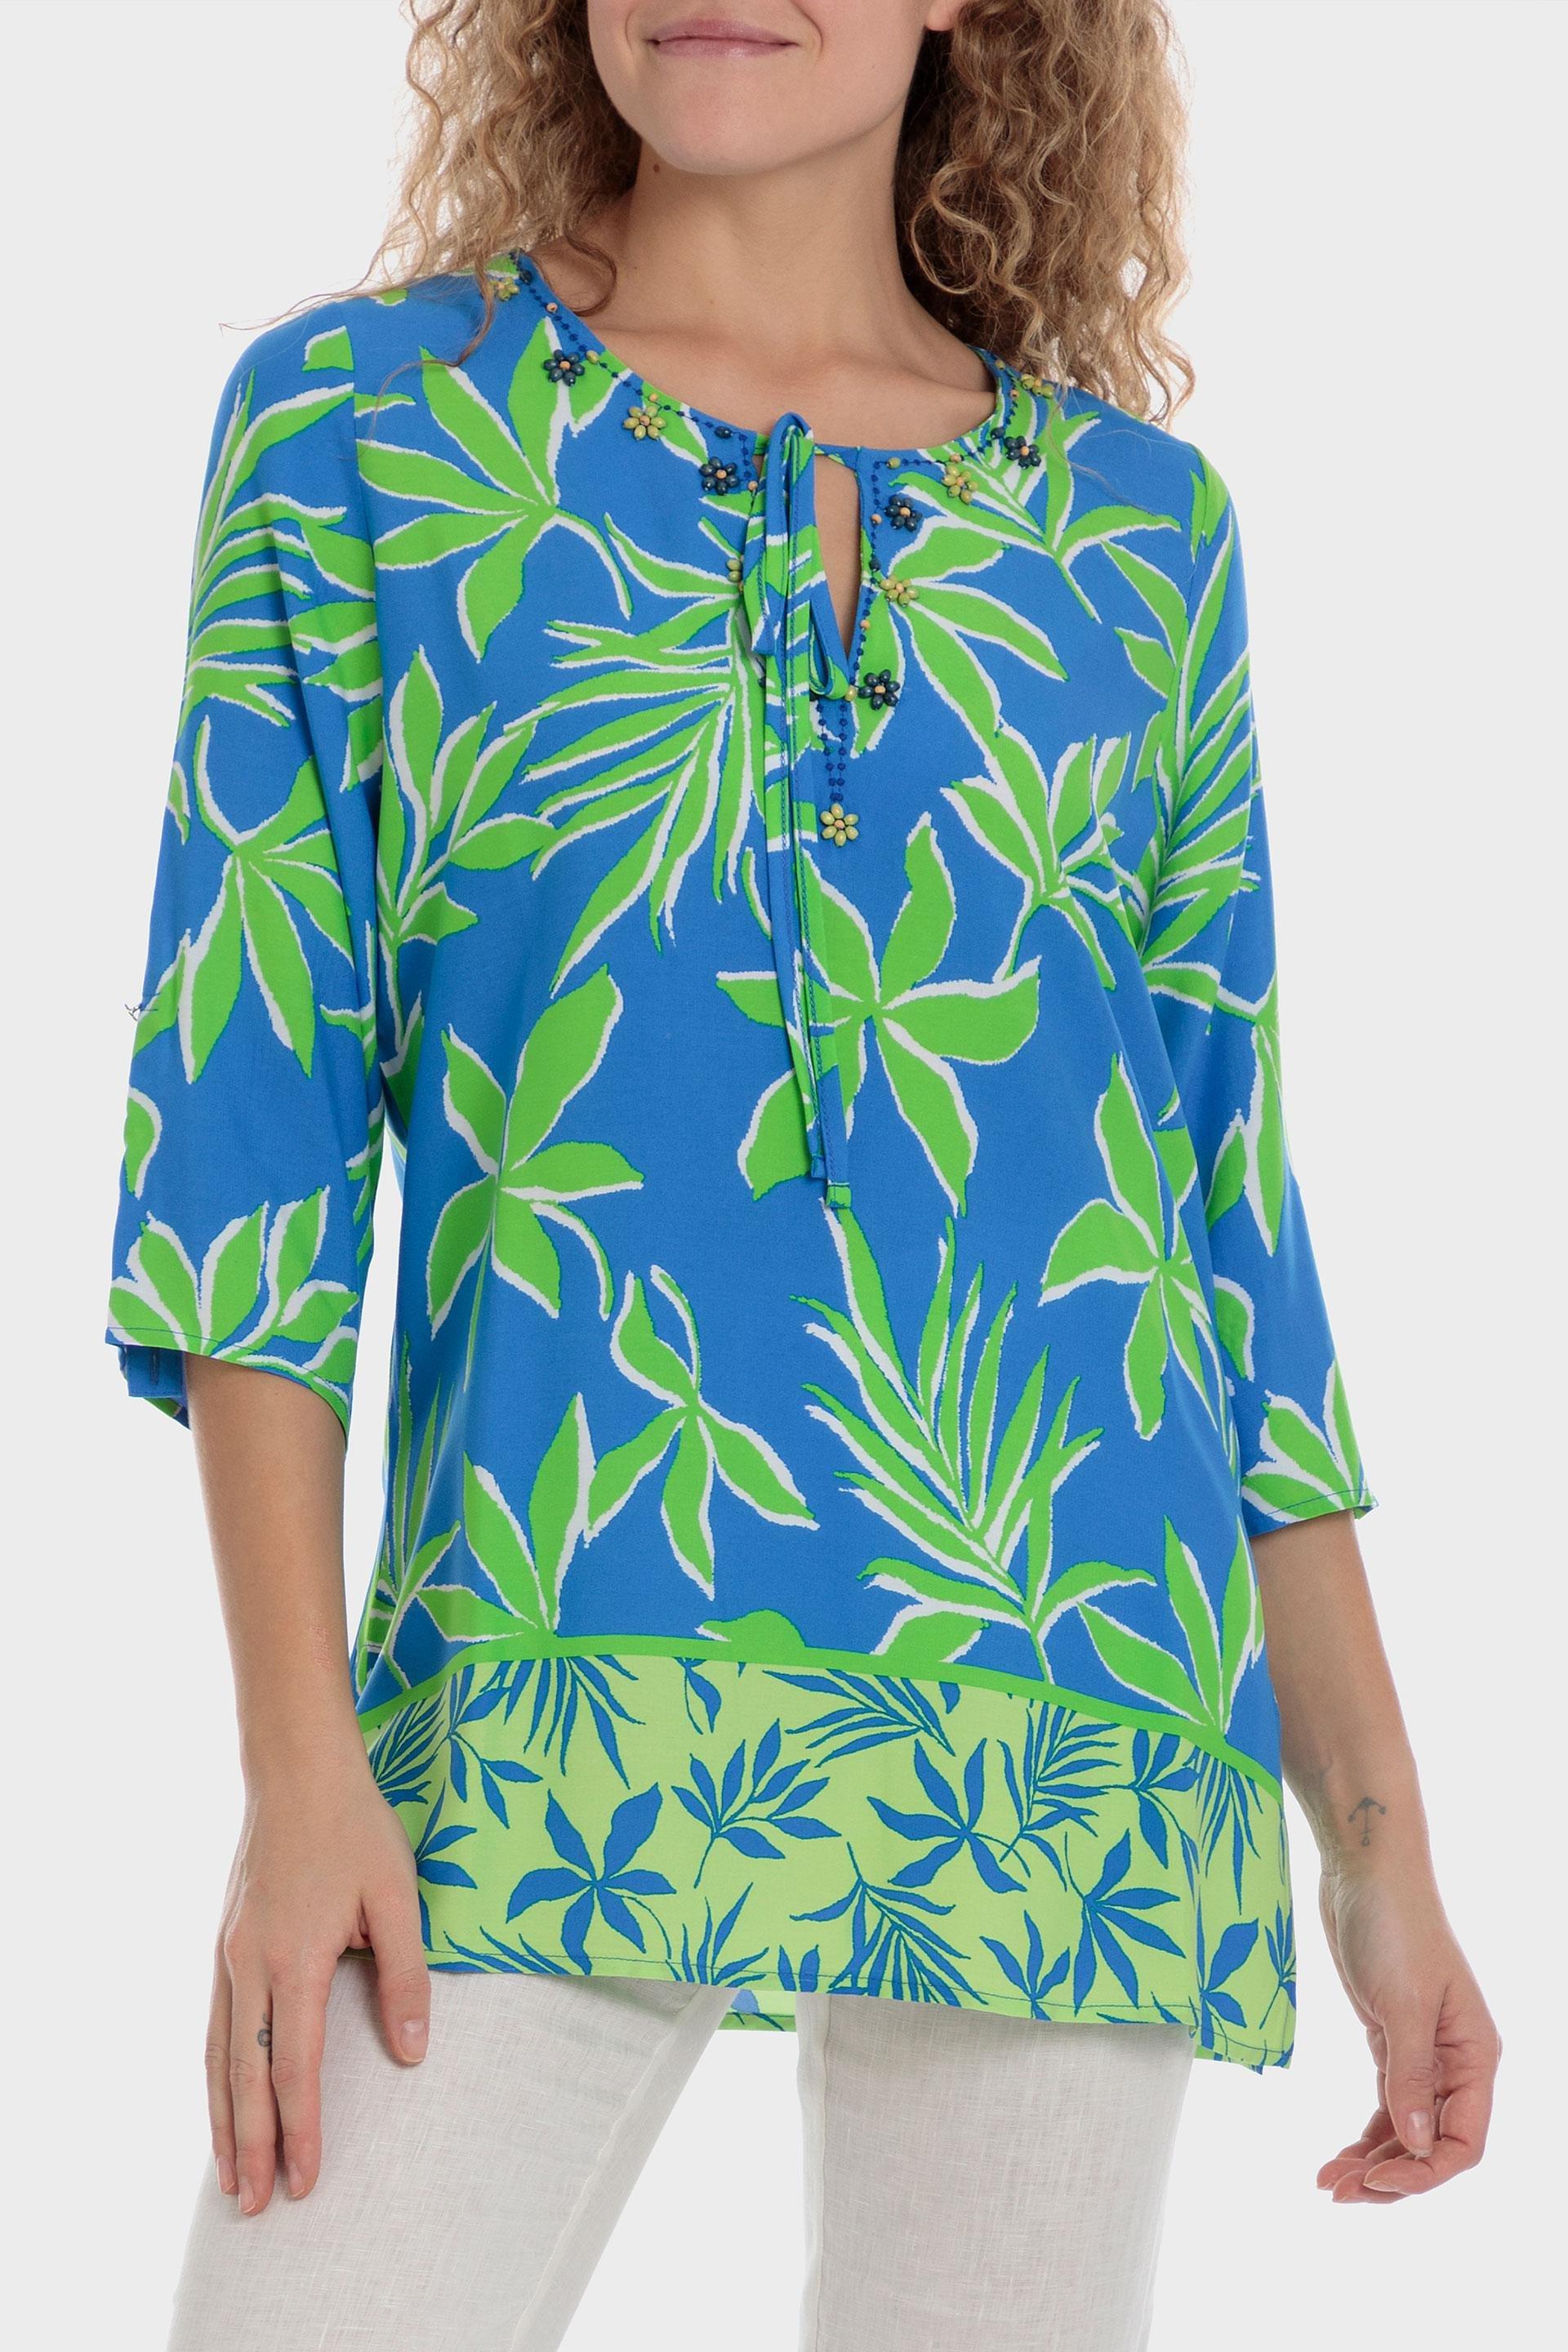 Punt Roma - Blue Printed Loose Fitting Blouse